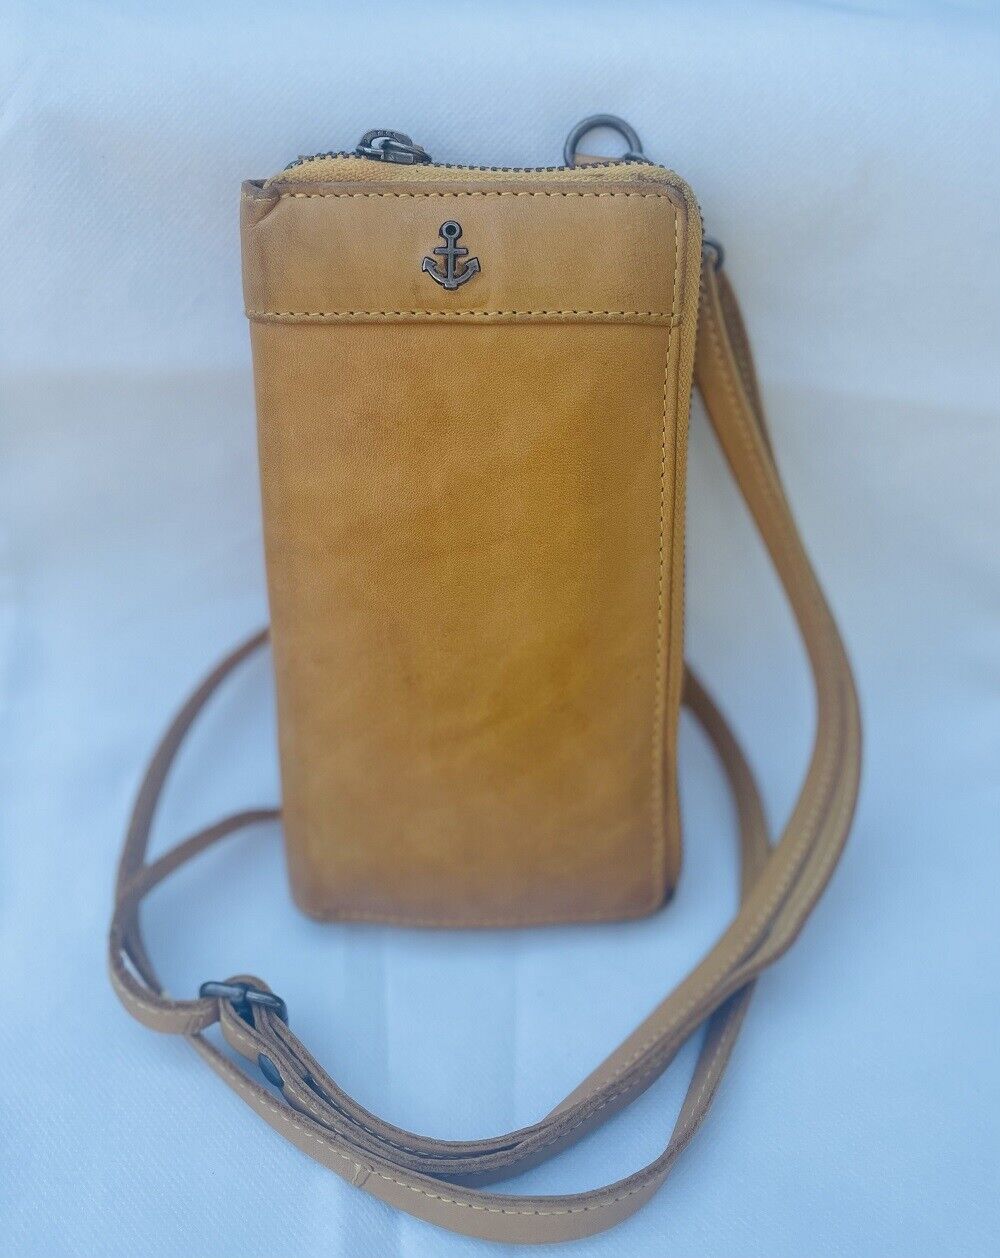 Harbour 2nd Genuine Leather "Lina" WALLET / PHONE CROSSBODY Bag NWT | eBay